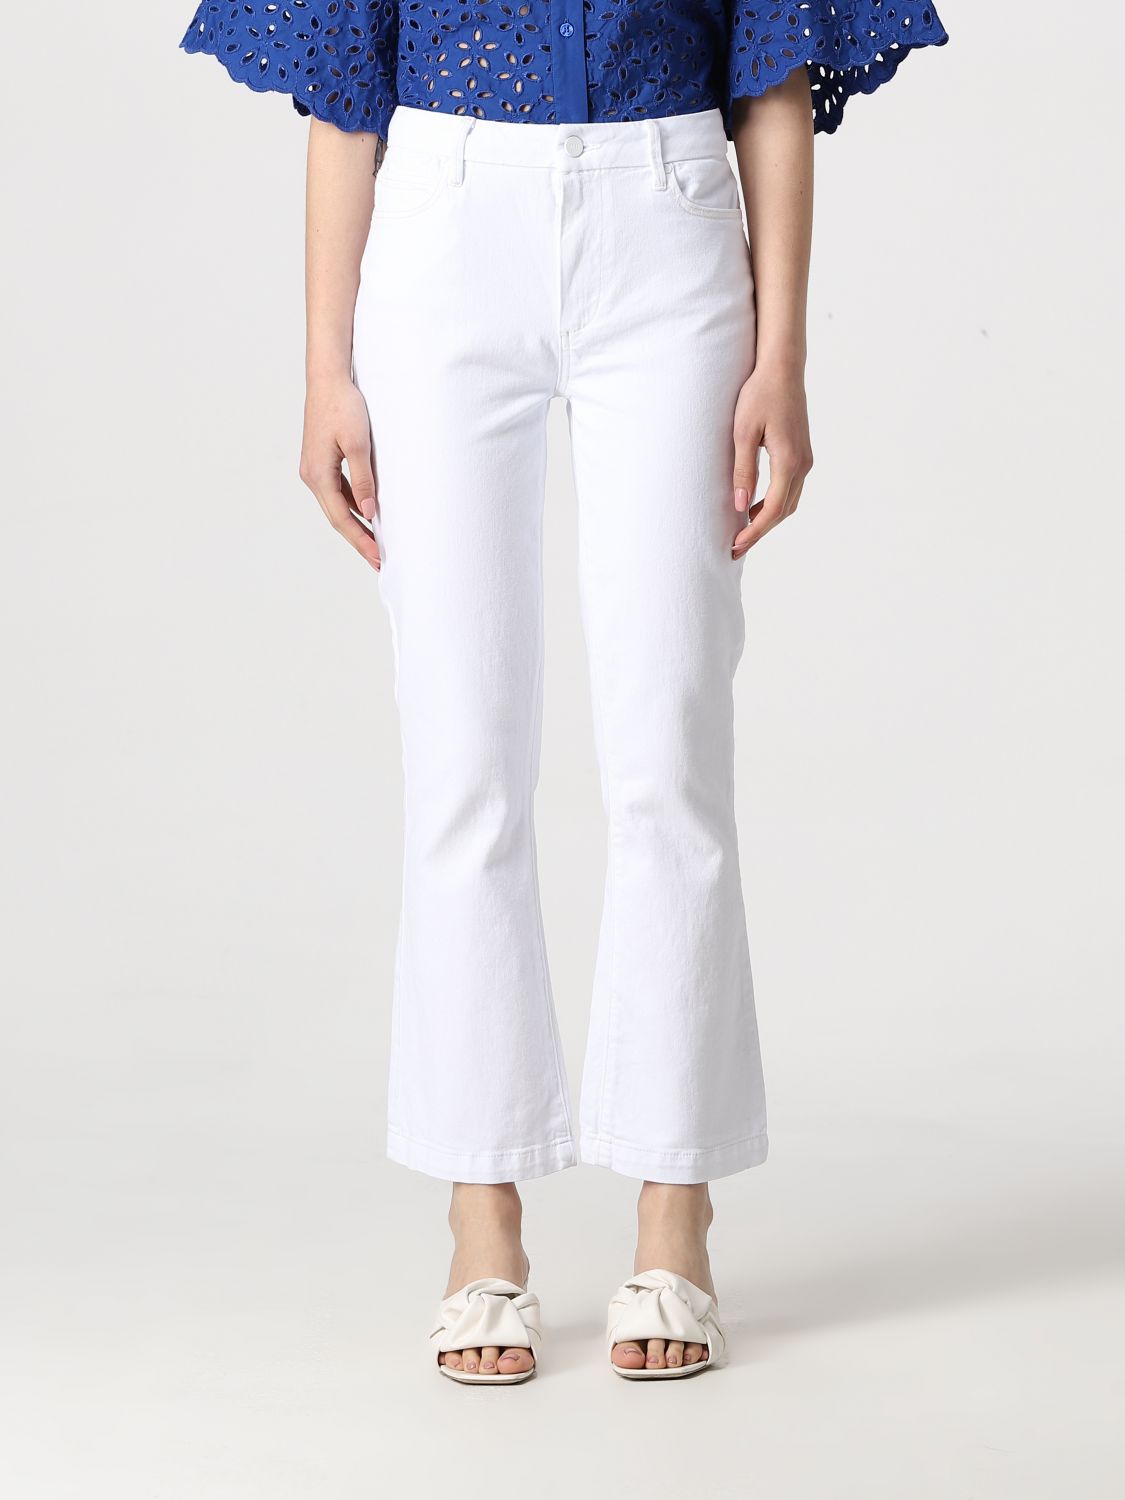 Paige Jeans  Woman In White